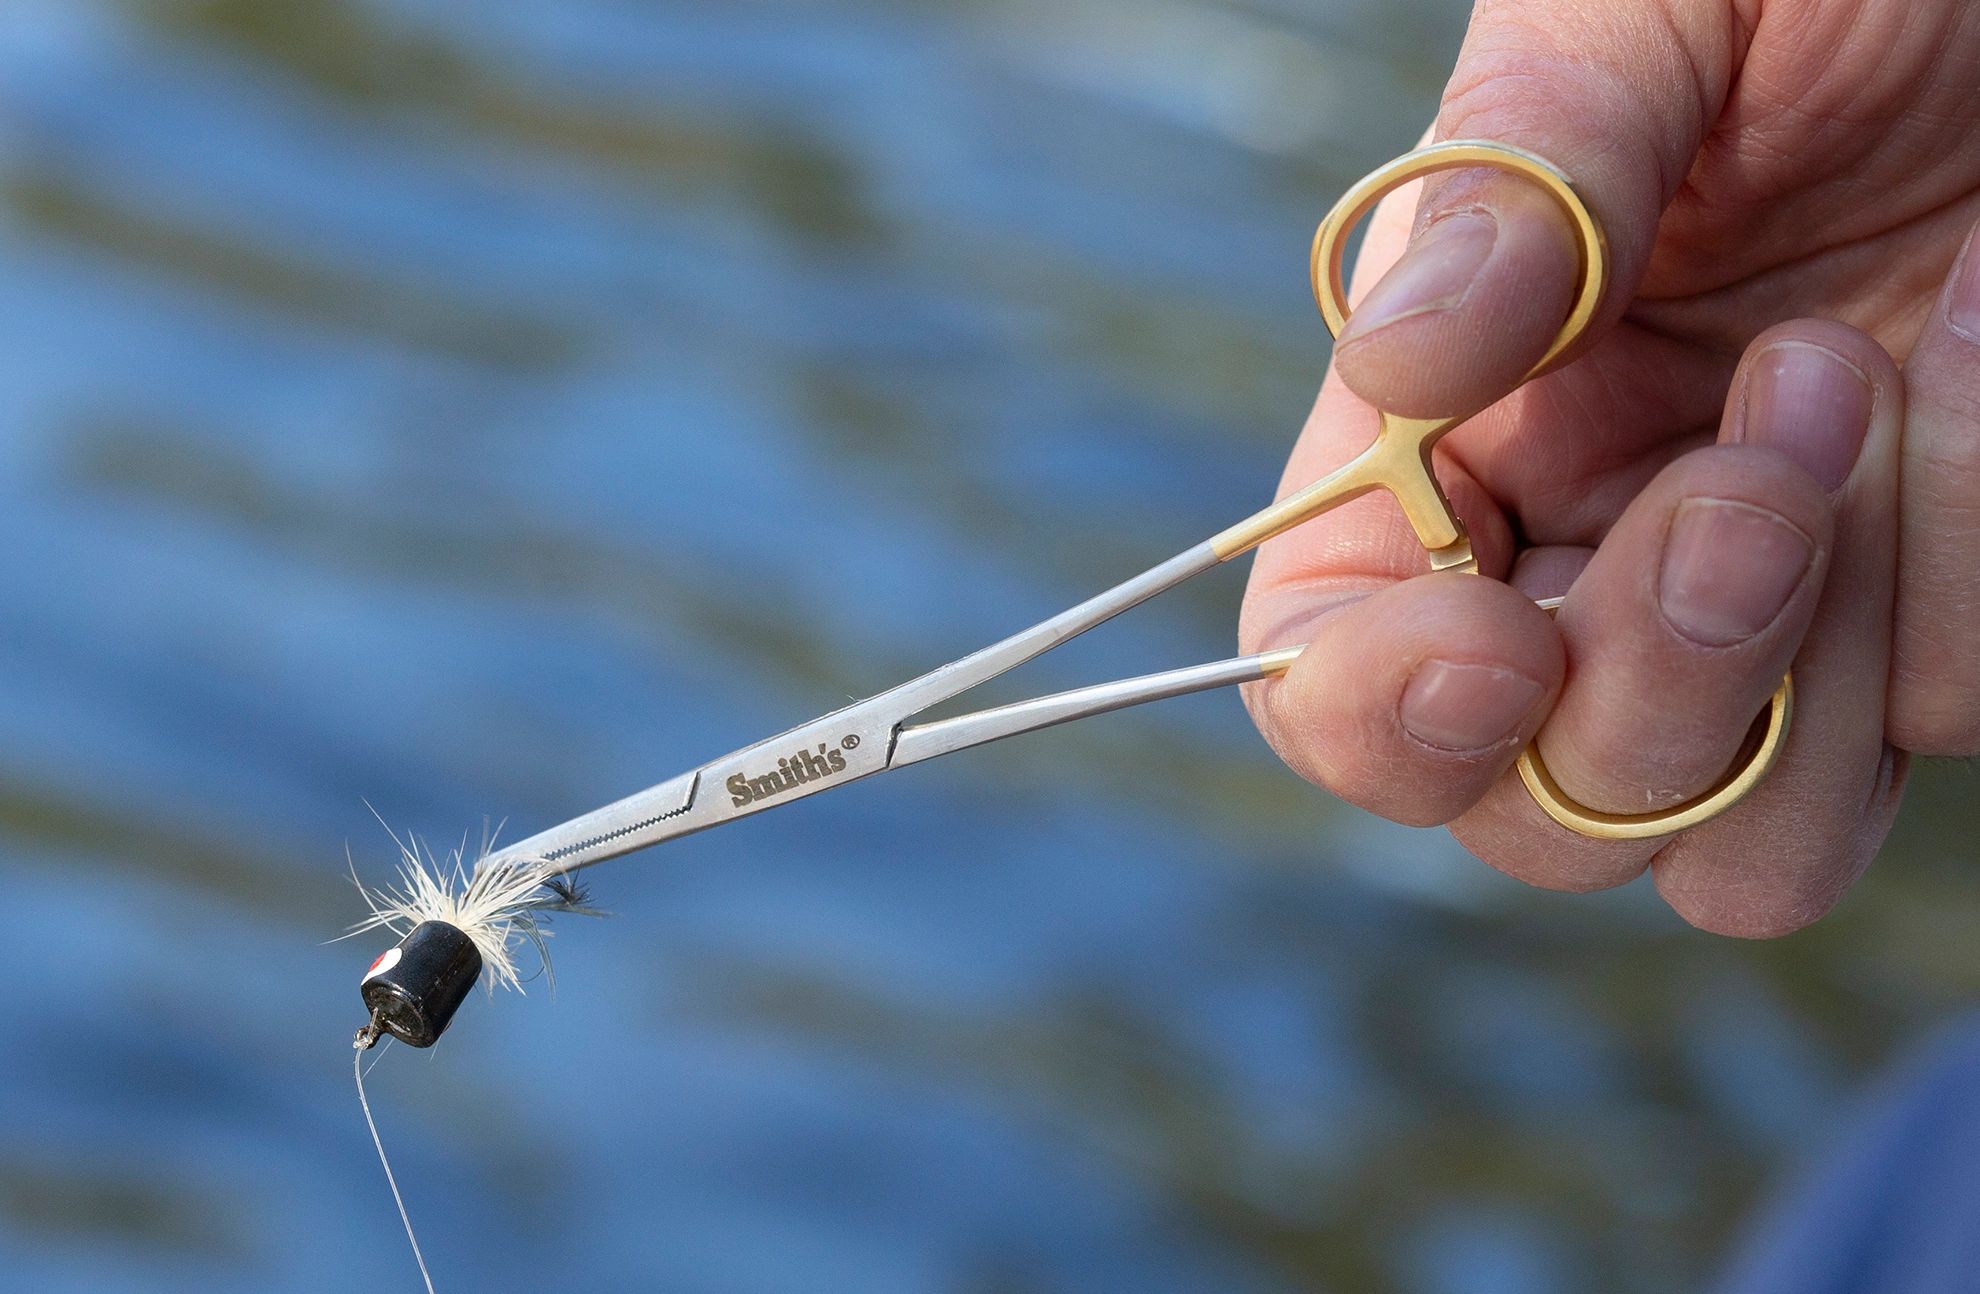 Smith's Consumer Products Premier Fly Fishing Forceps at ICAST 20